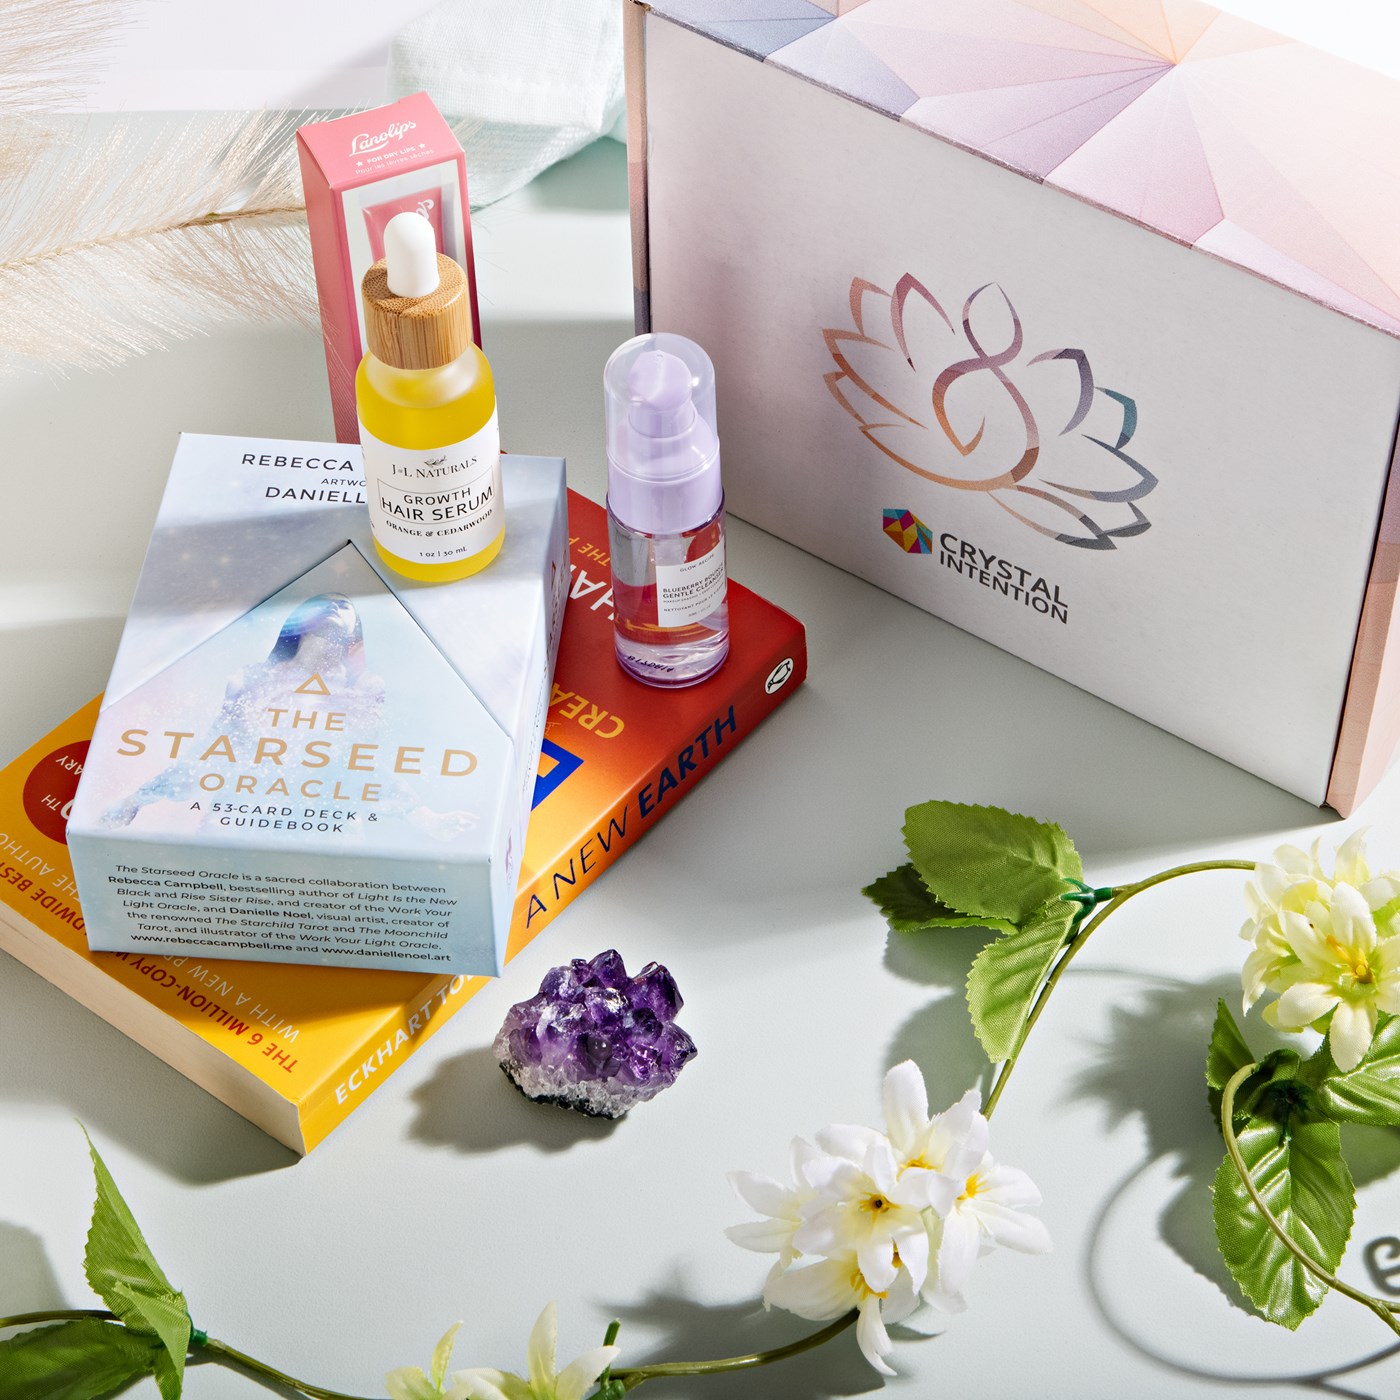  A Crystal Intention gift box, featuring crystals, hair serum, a book and guiding cards. 